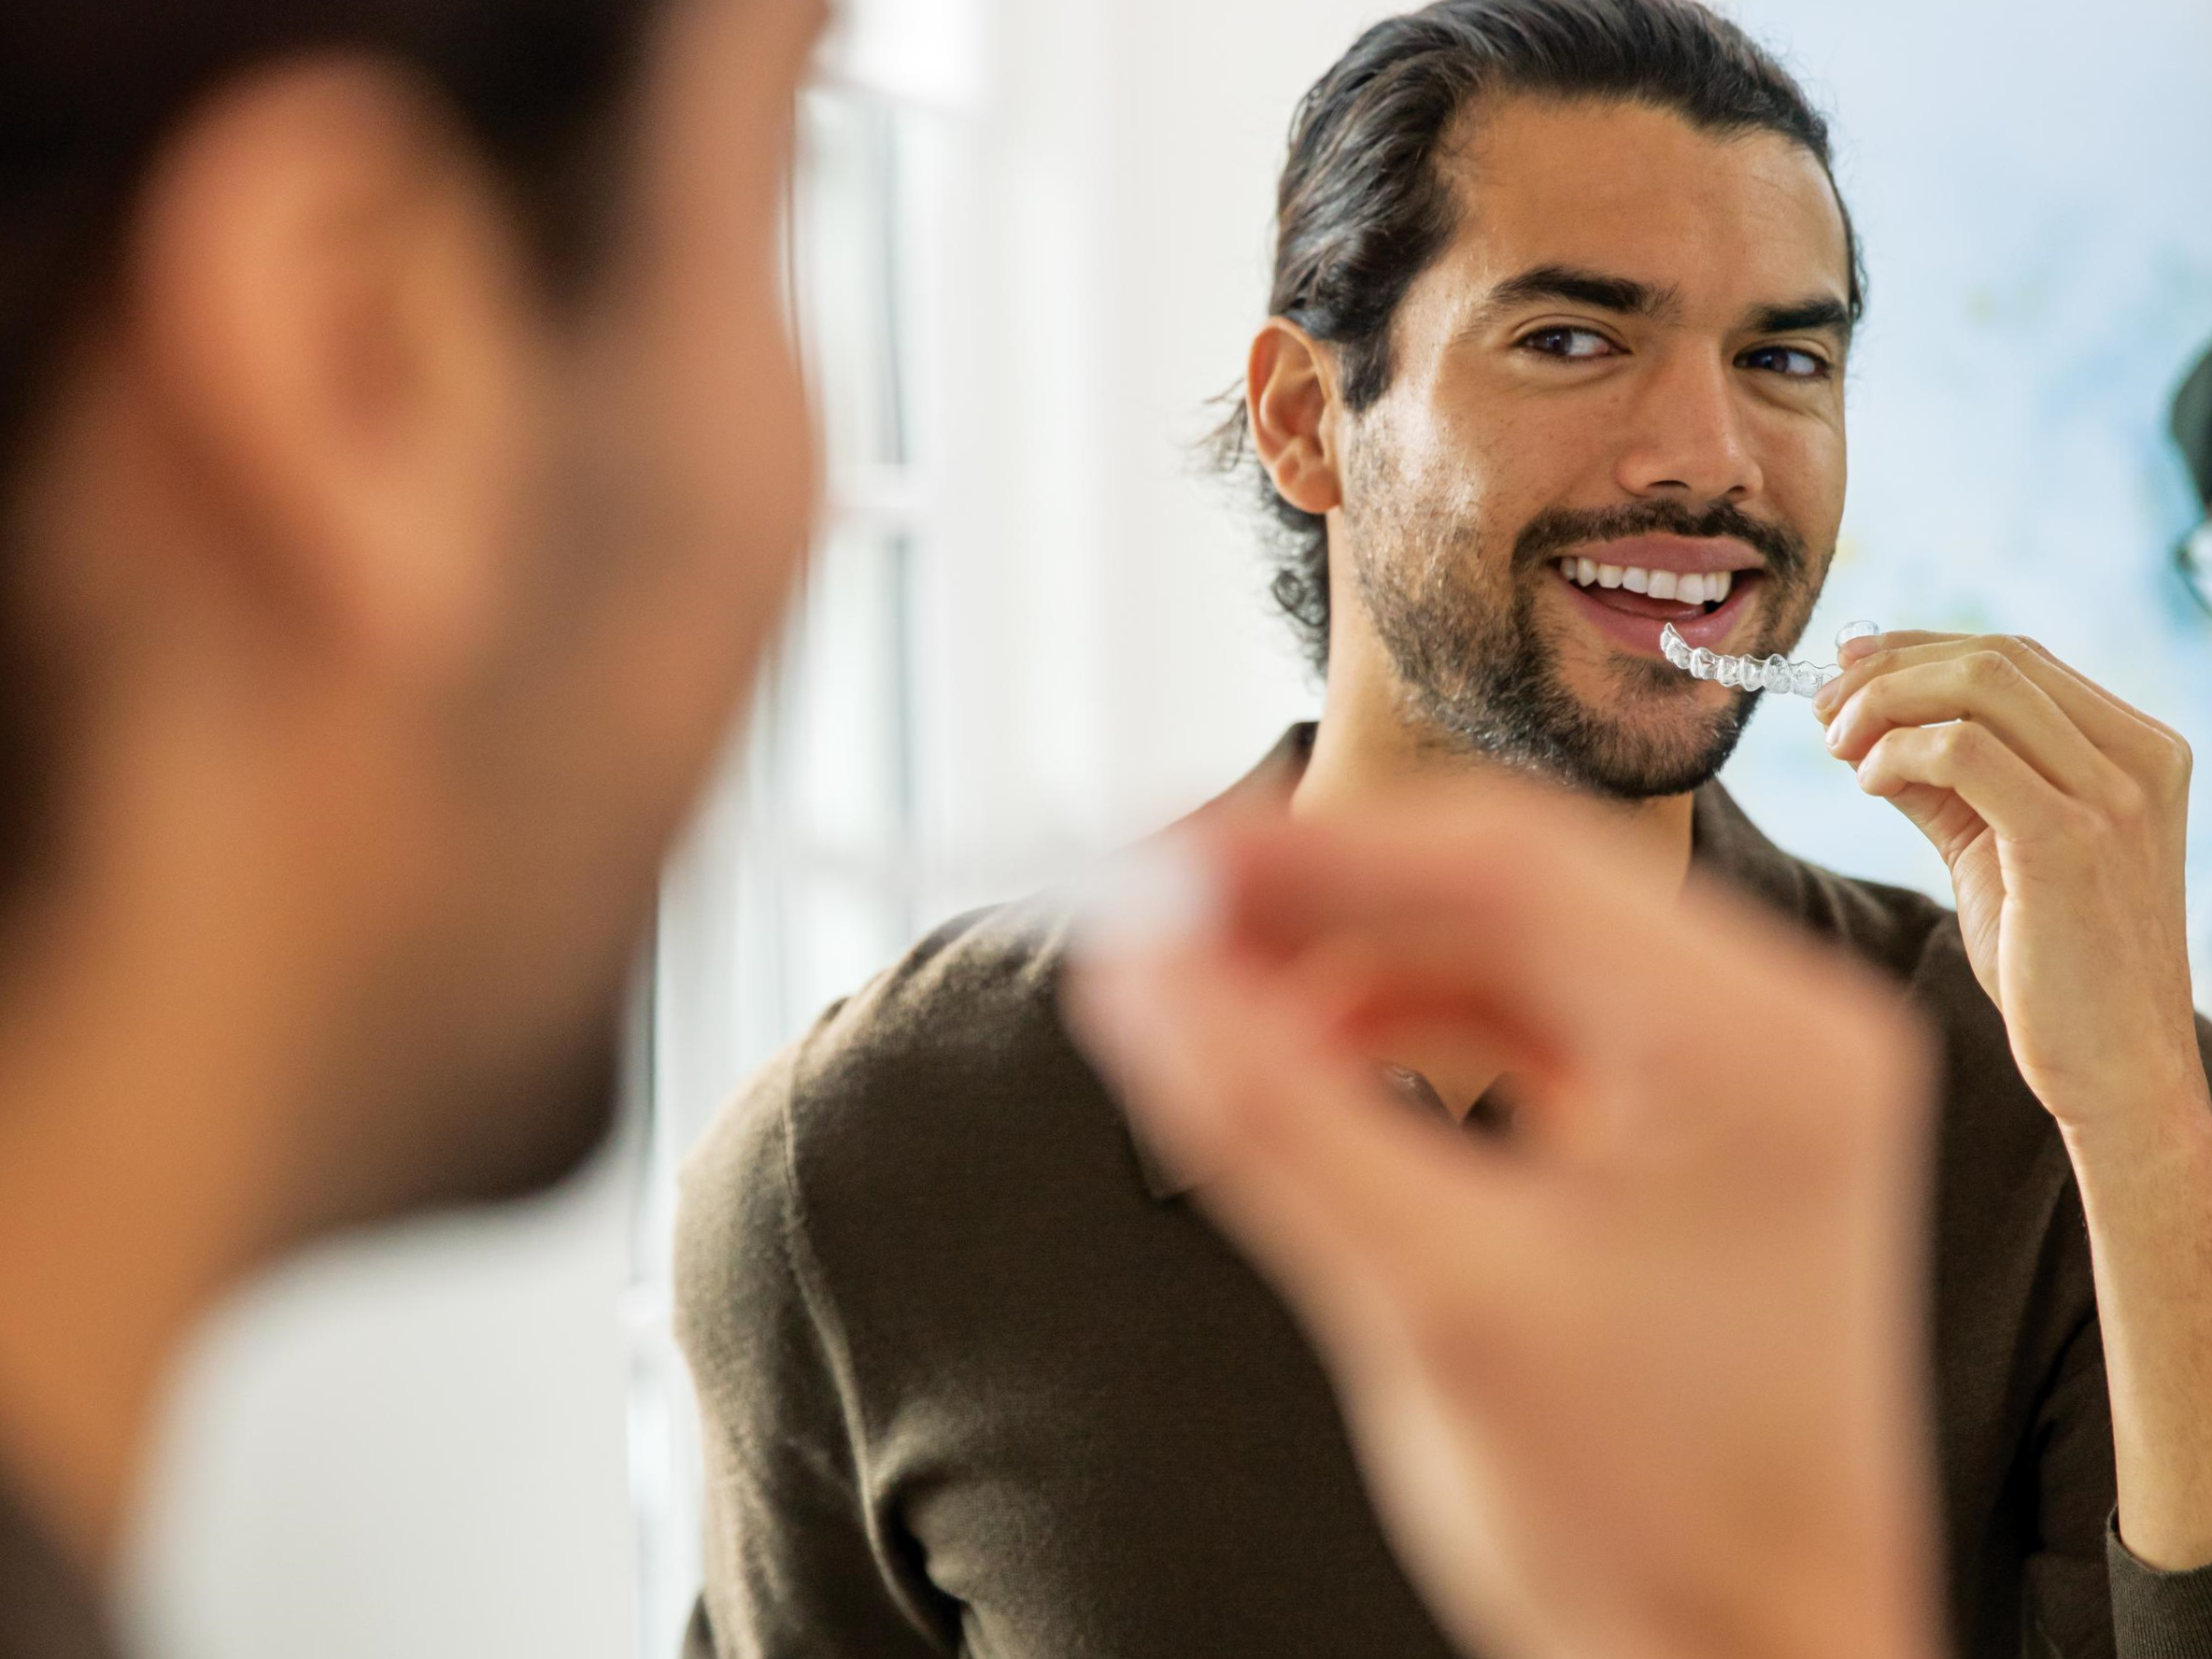 Young man smiling to the mirror while putting in his aligners